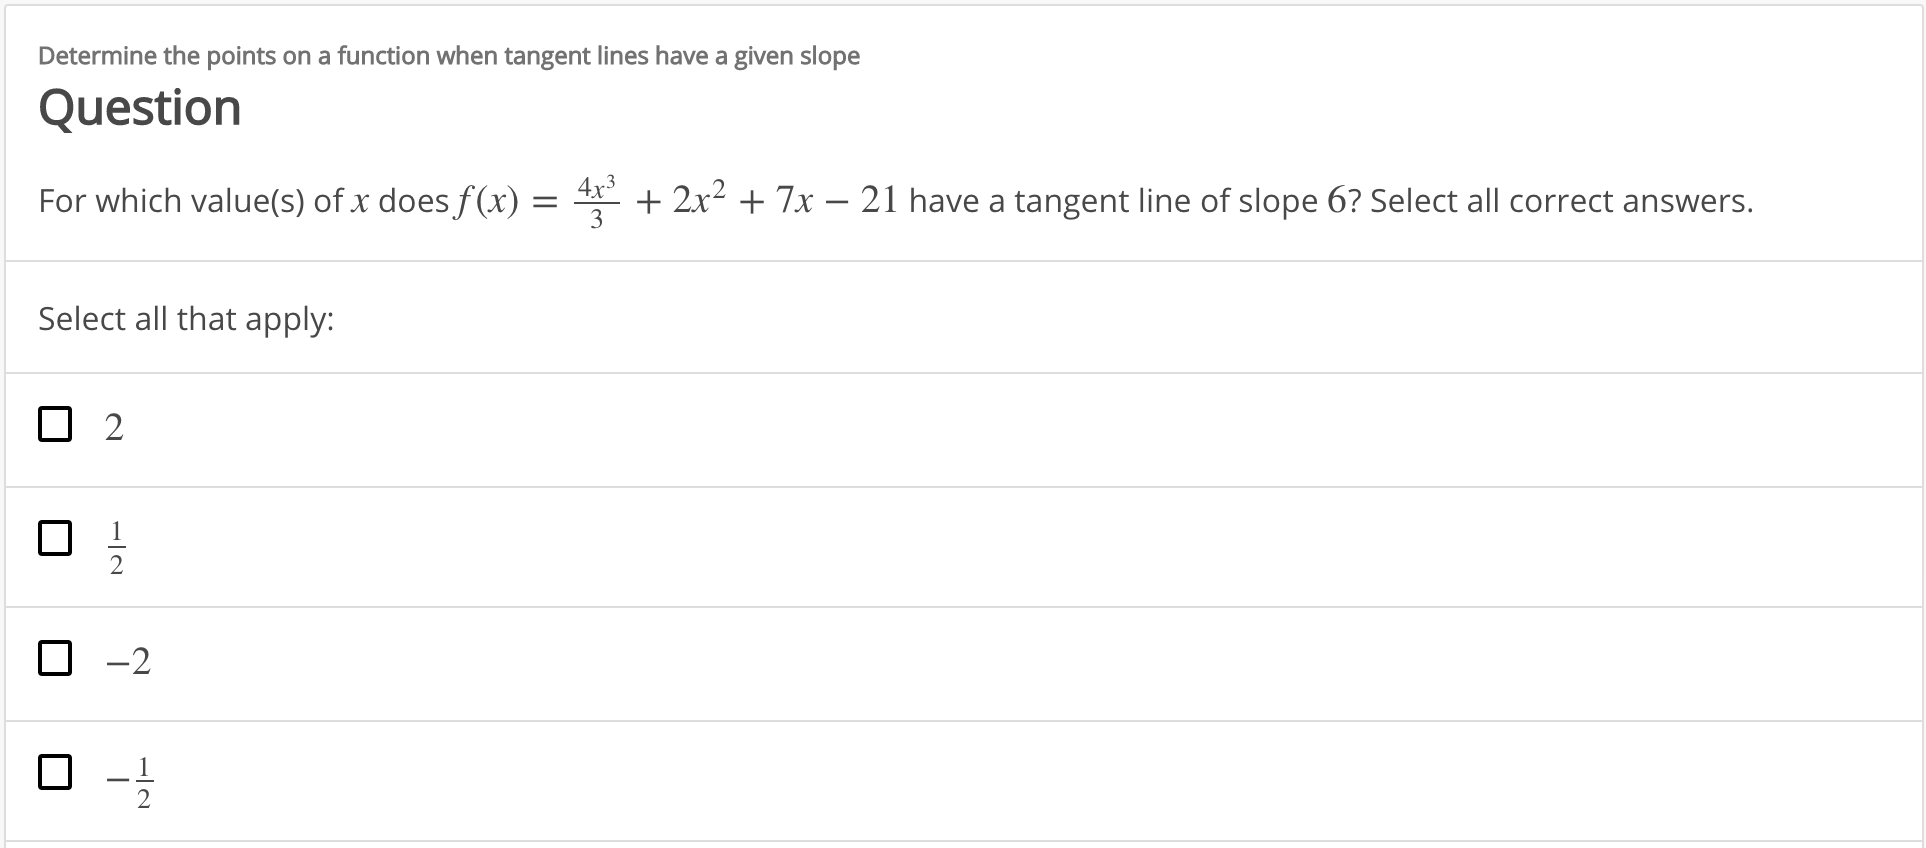 Determine the points on a function when tangent lines have a given slope
Question
4x3
For which value(s) of x does f(x)
2x
7x -21 have a tangent line of slope 6? Select all correct answers.
Select all that apply:
2
O-2
2
